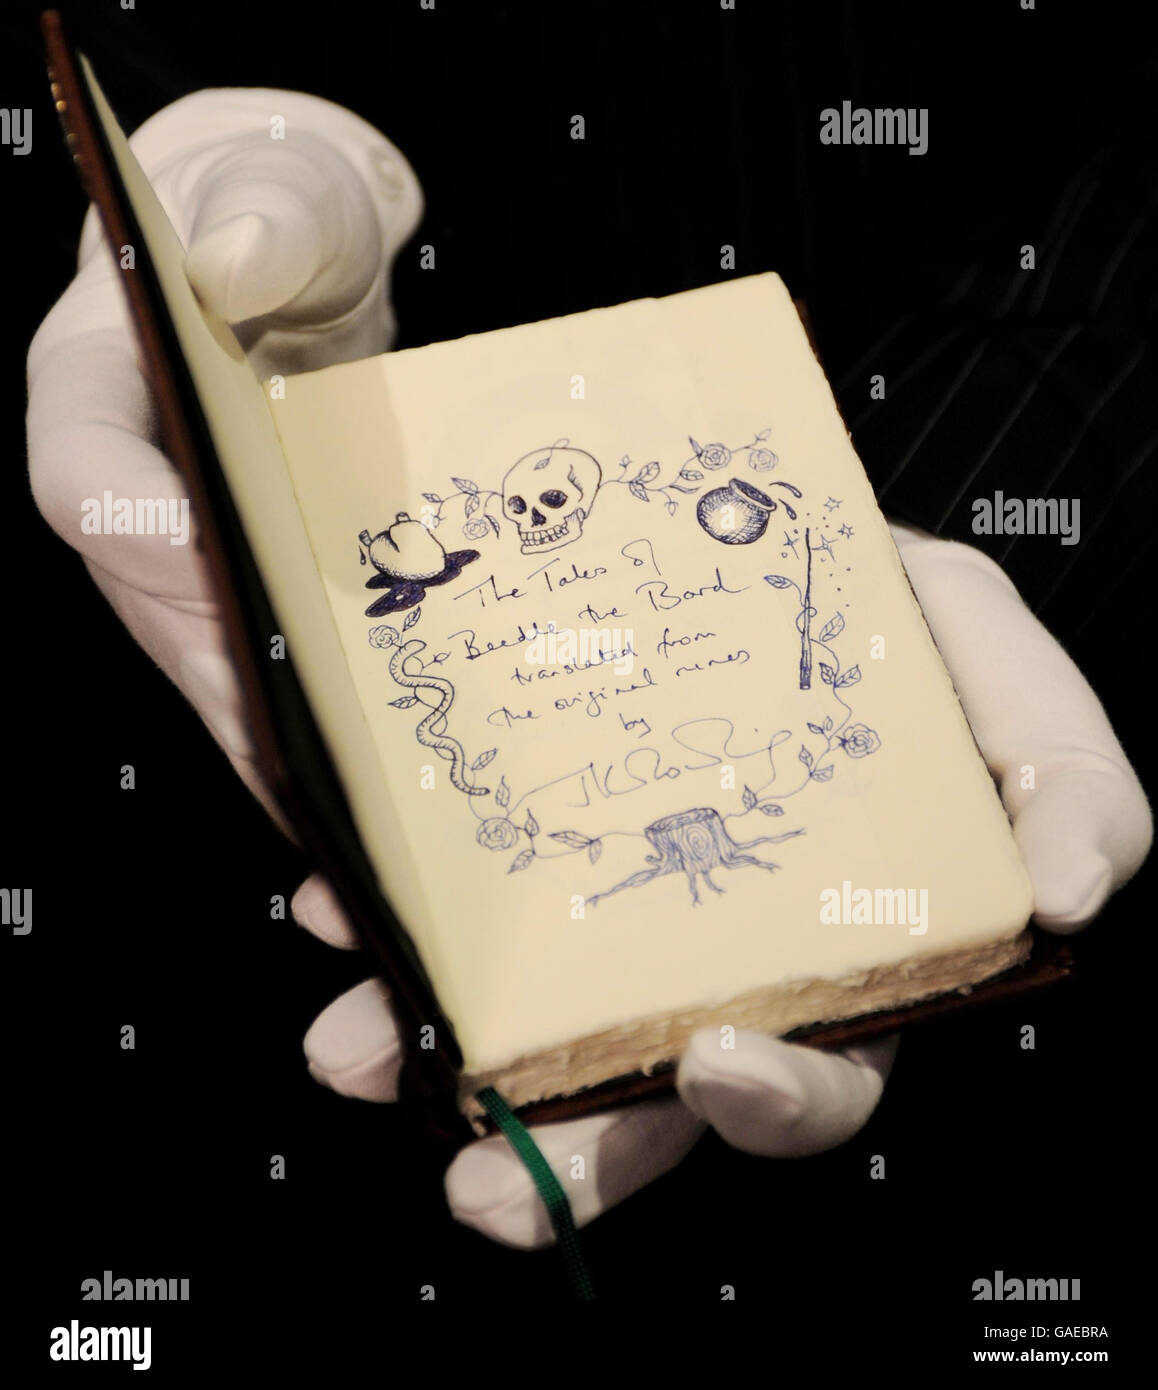 A hand-written copy of 'The Tales of Beedle the Bard' by JK Rowling on show at Sotheby's in London today. The previously untold stories will be auctioned next week to raise money for 'The Children's Voice campaign. Stock Photo